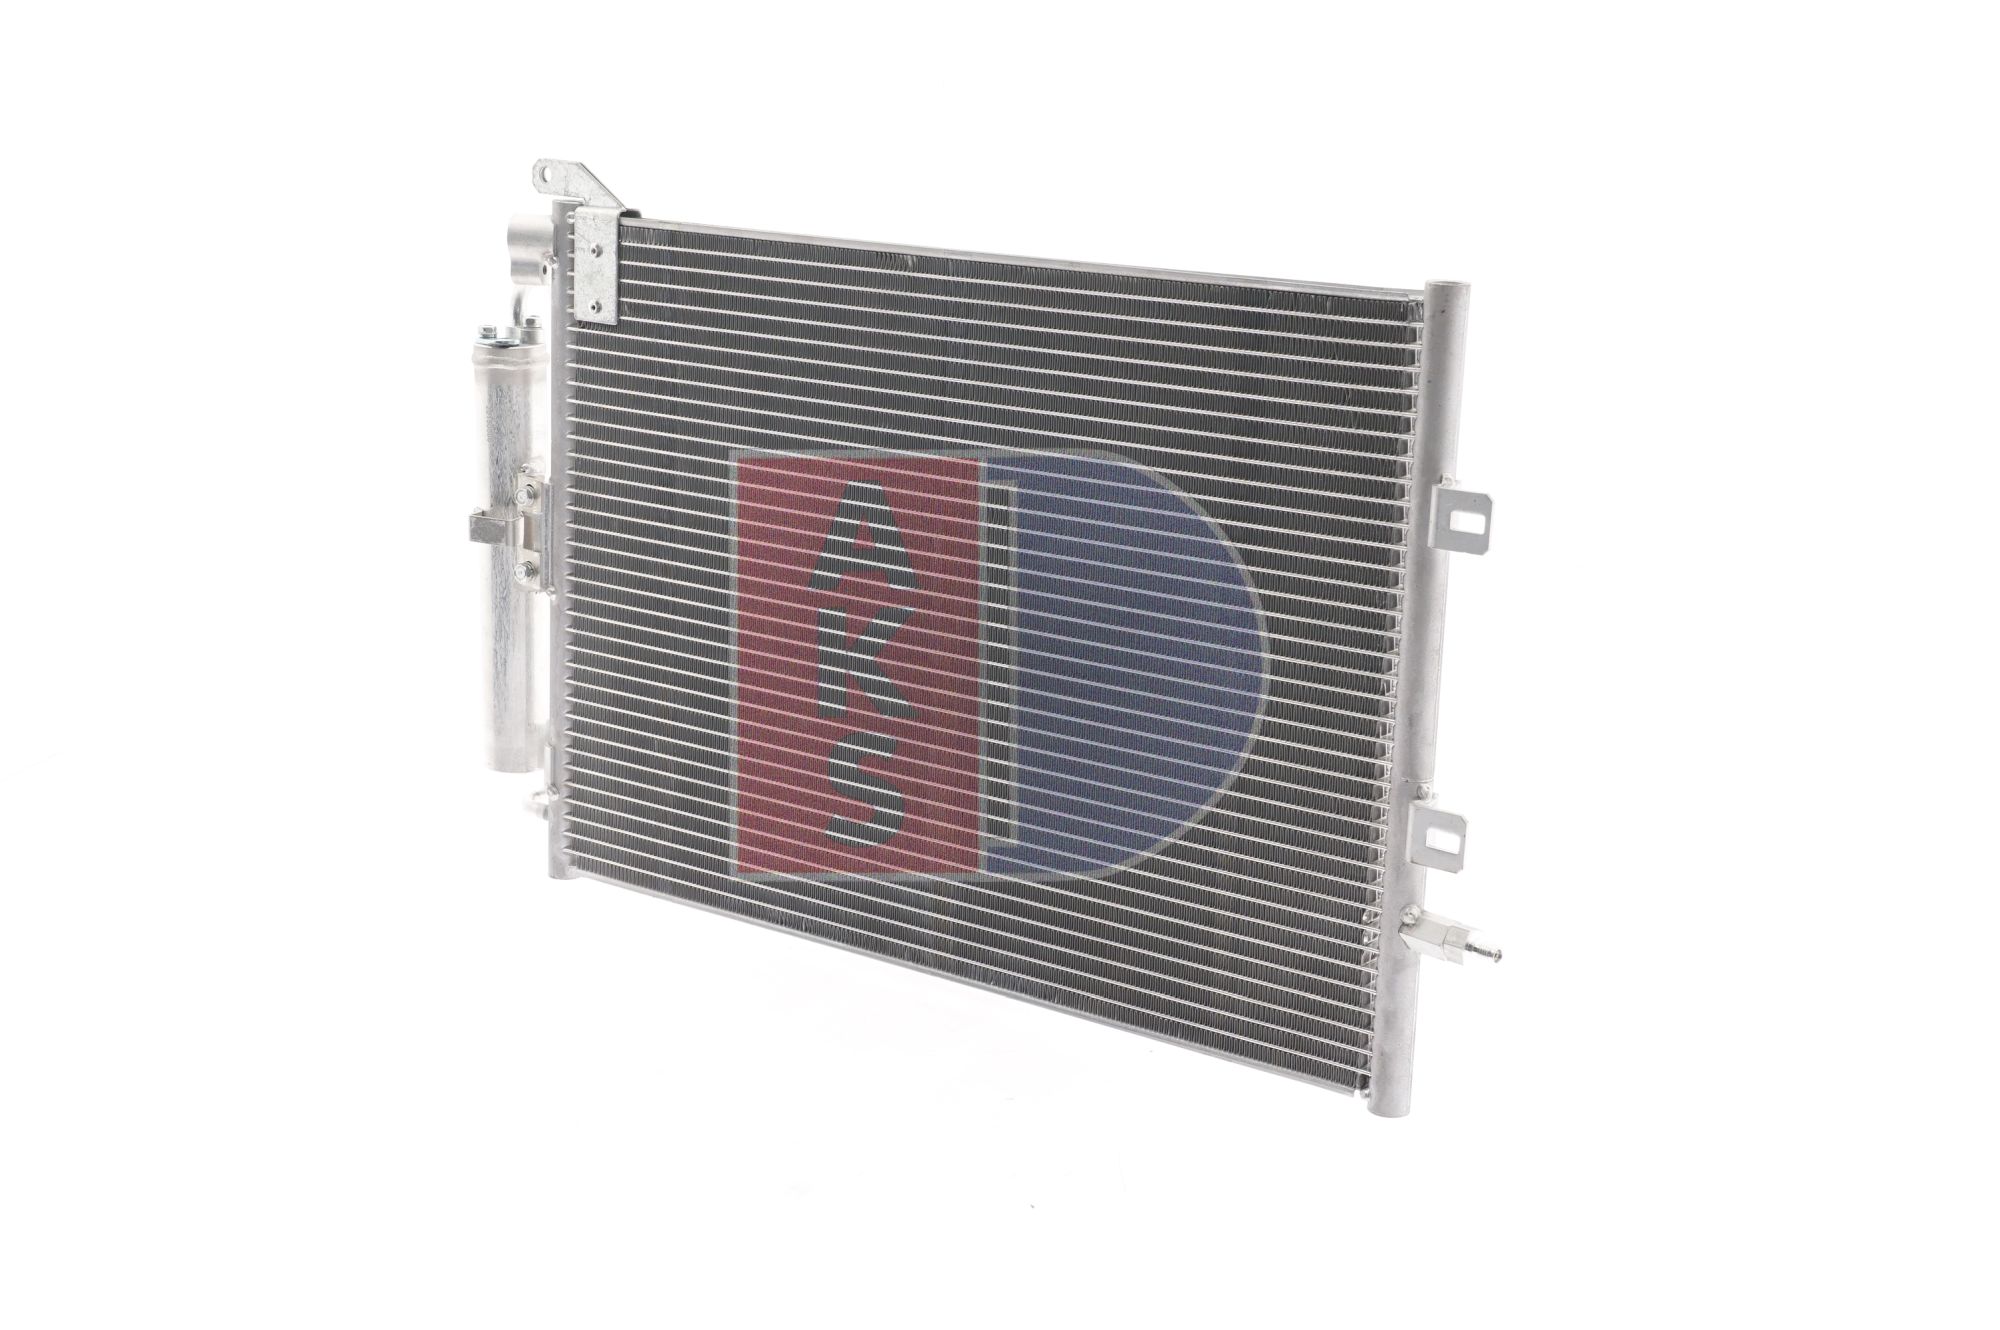 AKS DASIS 182035N Air conditioning condenser without dryer, 15,5mm, 8,5mm, 510mm